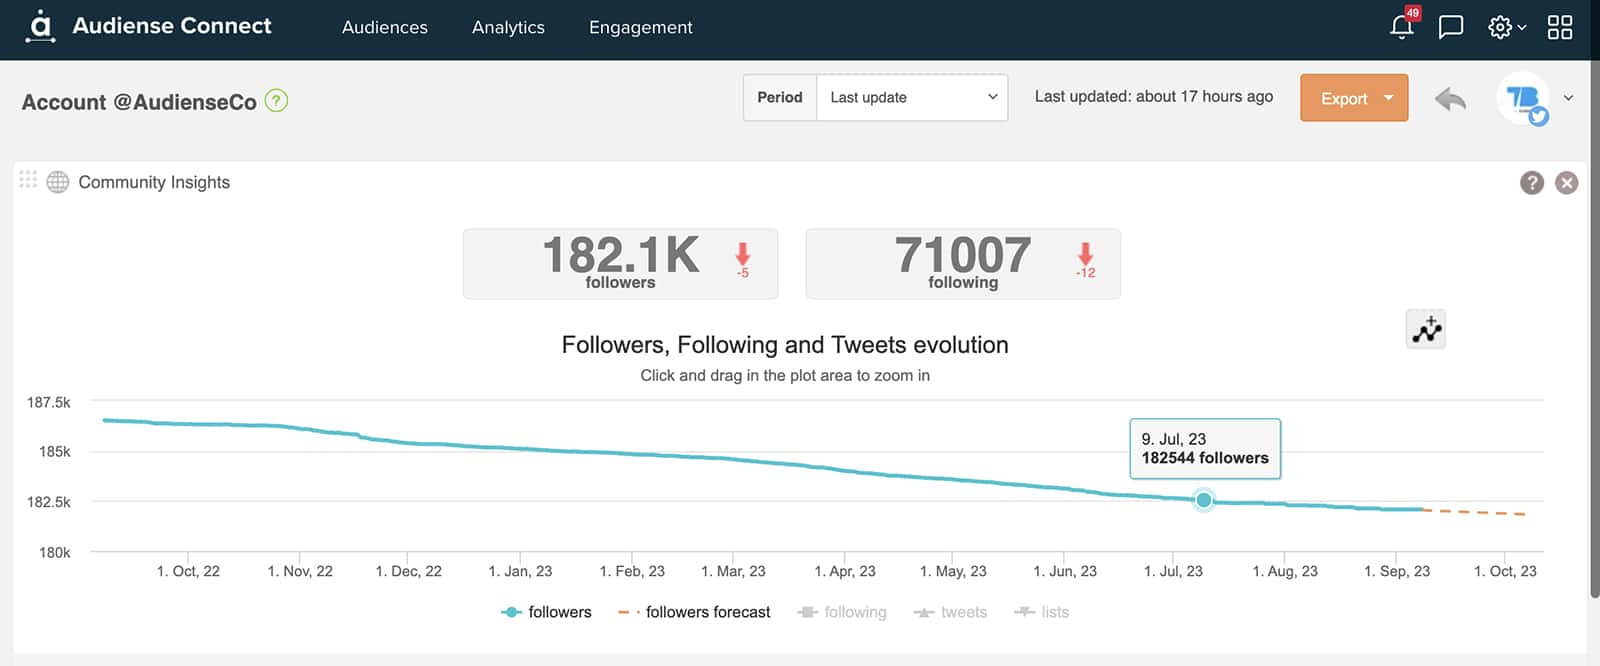 Audiense Connect - Twitter competitor analytics tool